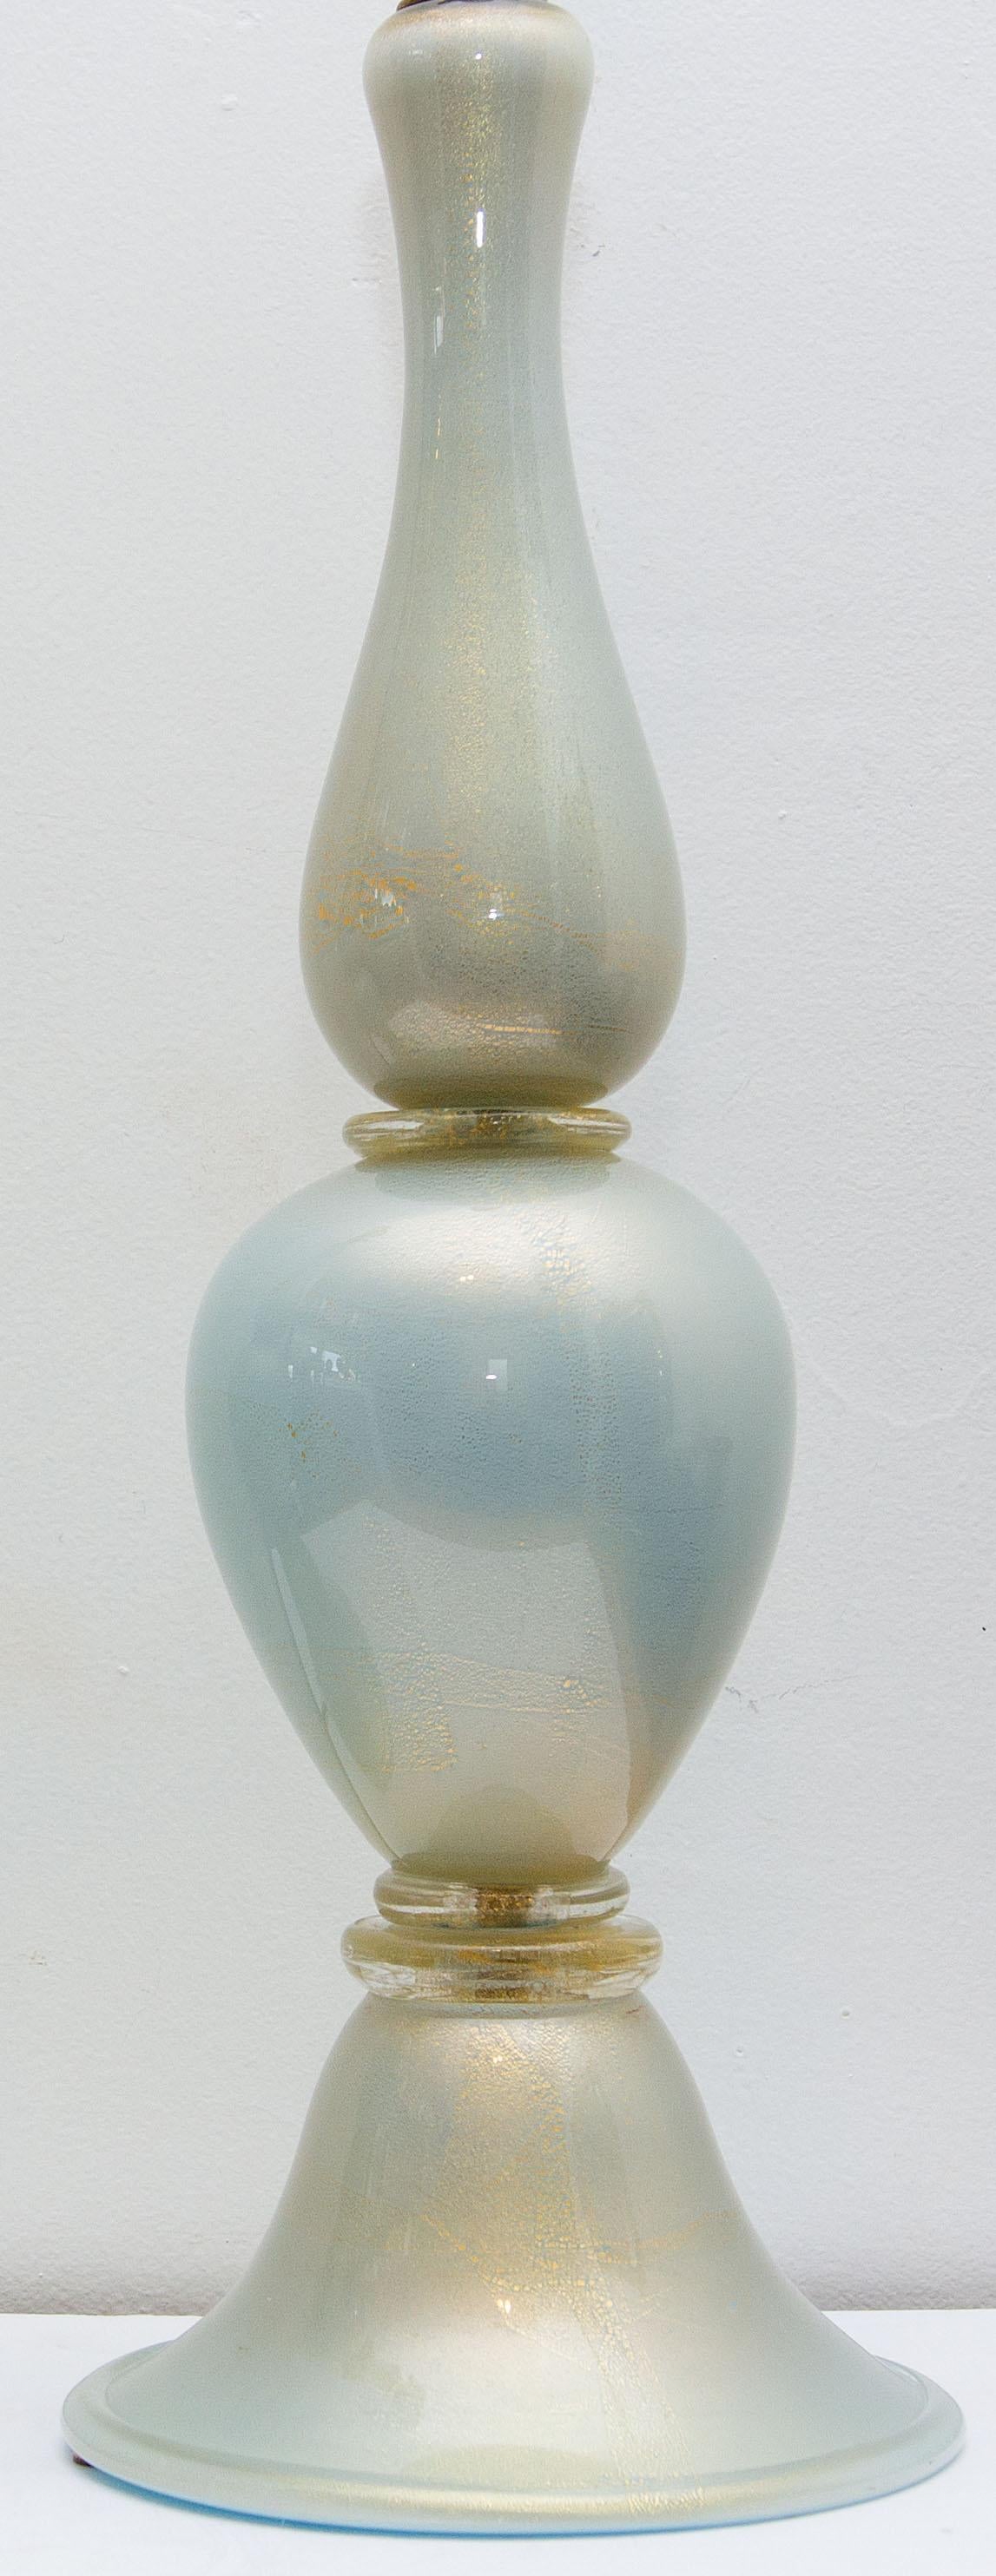 Exceptional pair of Venetian Murano glass table lamps. Finely made. Very unusual subtle color. Pearlescent light blue with gold flecks, circa 1960. No shade. Height to top of finial is 36